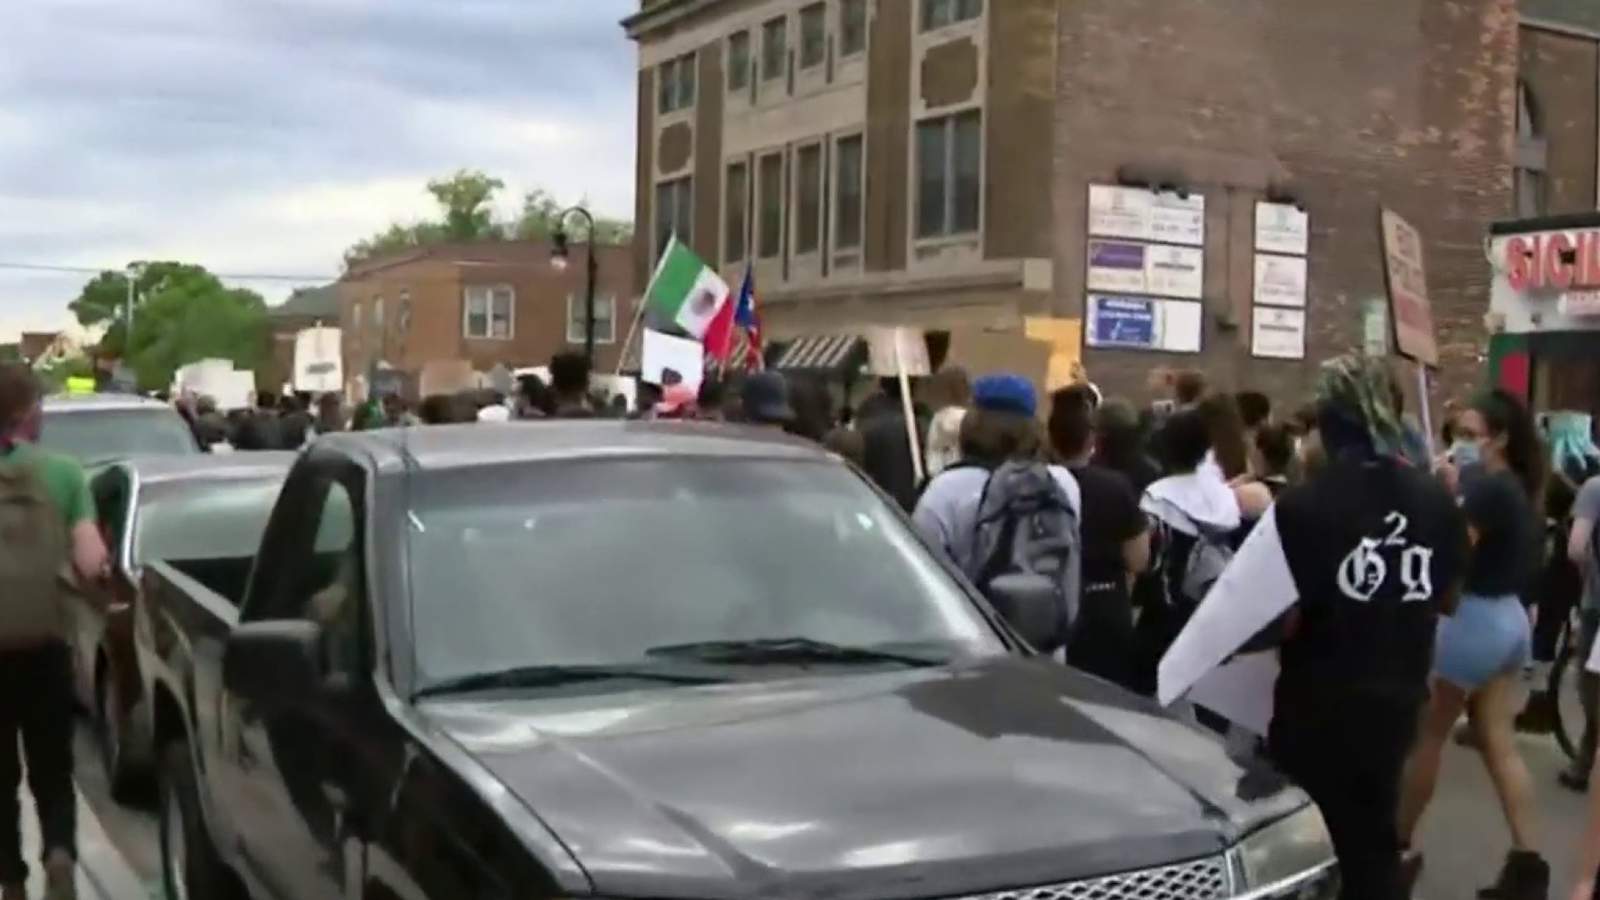 Protest in Detroit ends peacefully without arrests, violence